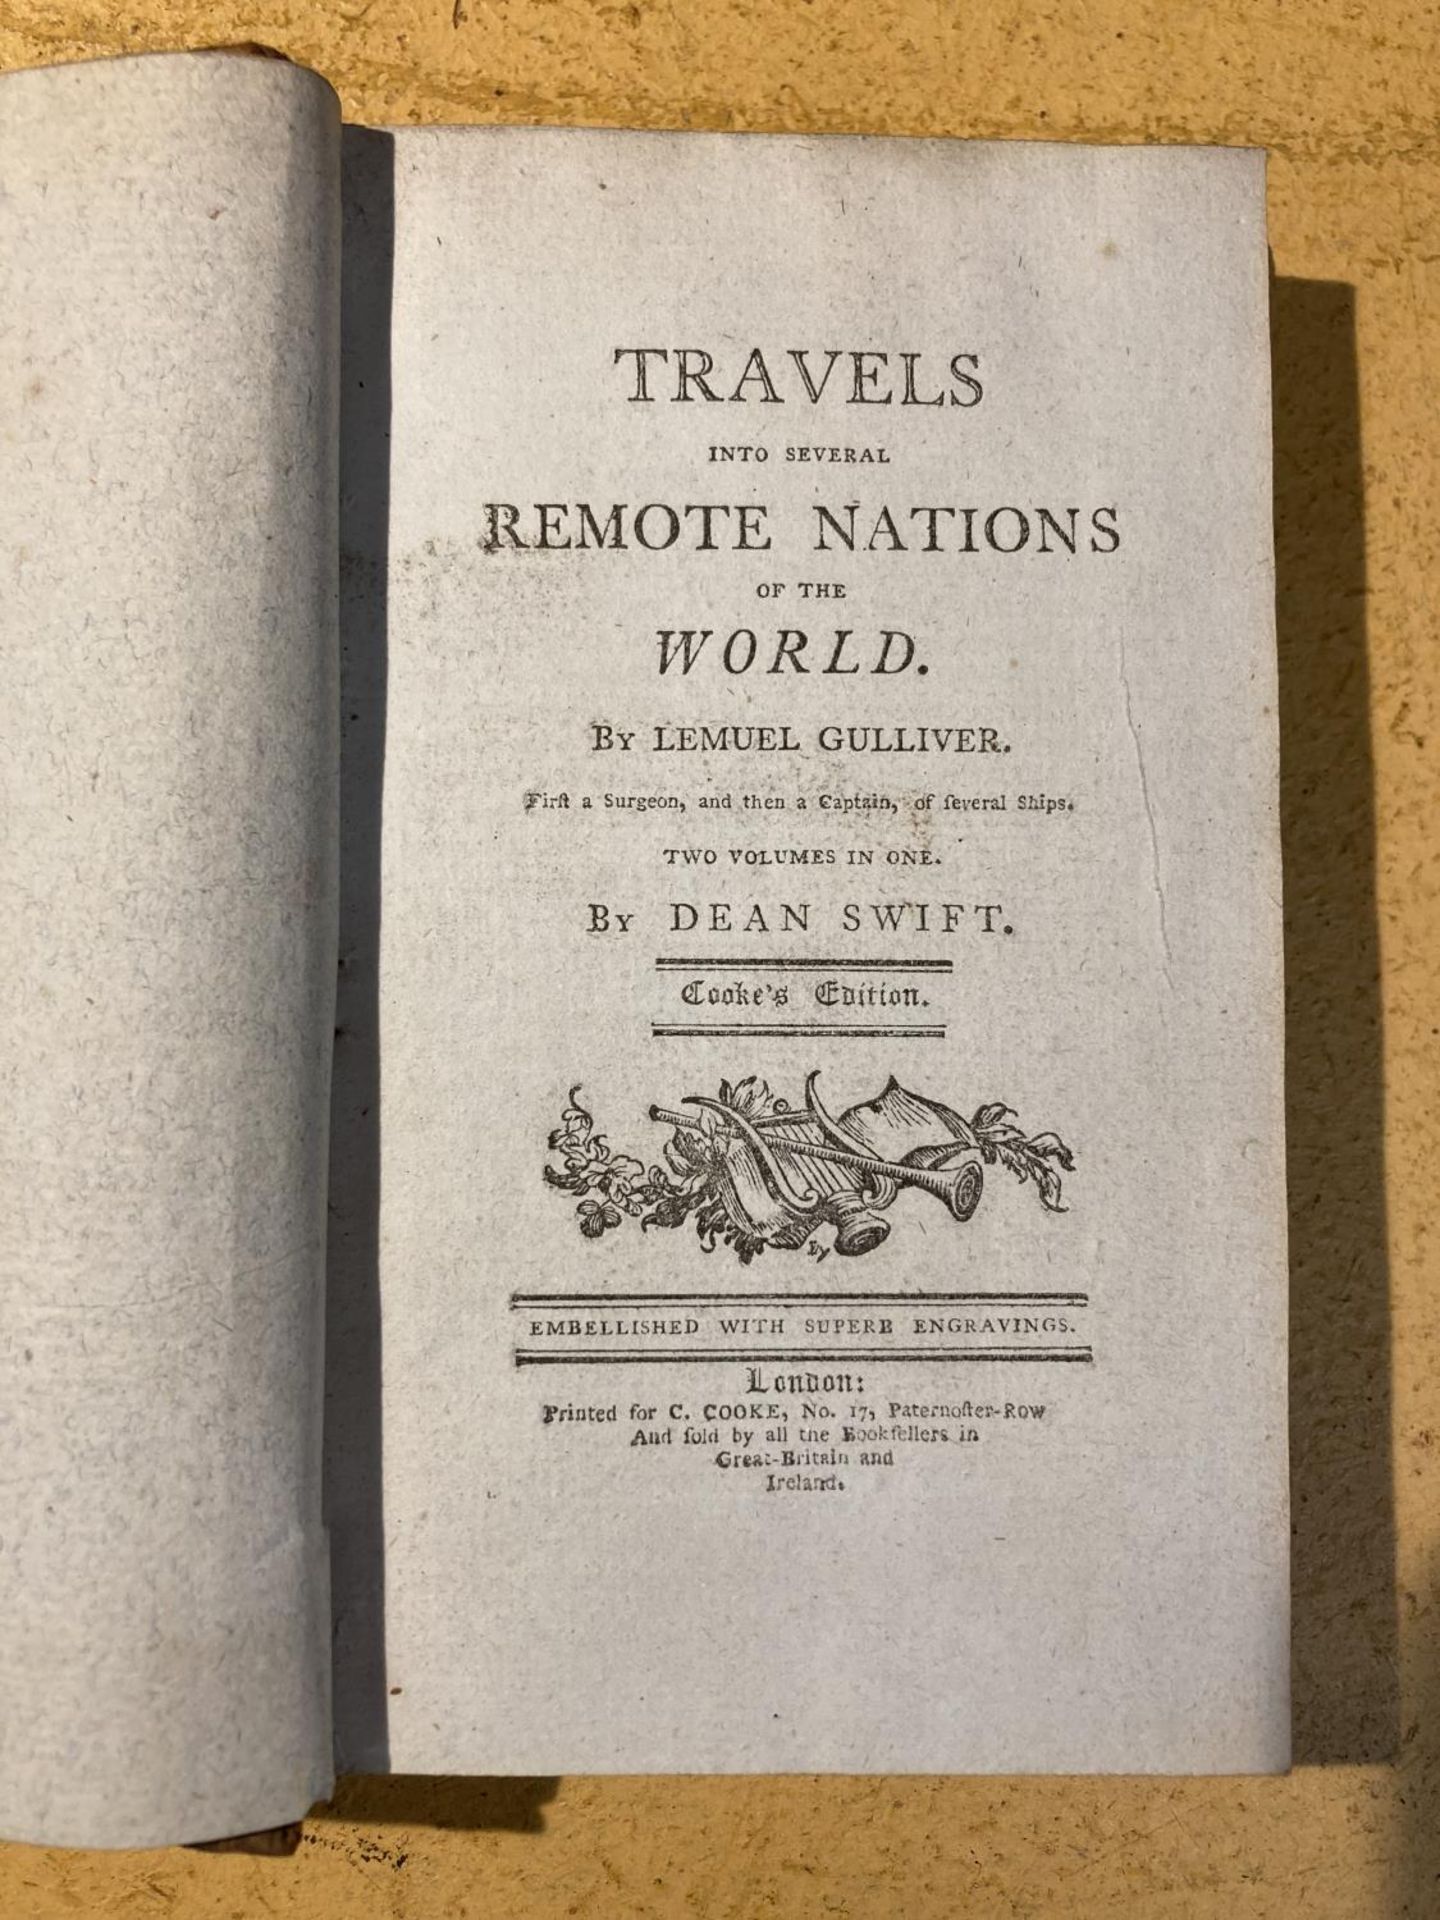 A SCARCE AND RARE COOKE'S EDITION TRAVELS INTO SEVERAL REMOTE NATIONS LEMUEL GULLIVER, BY J SWIFT, 2 - Image 4 of 4